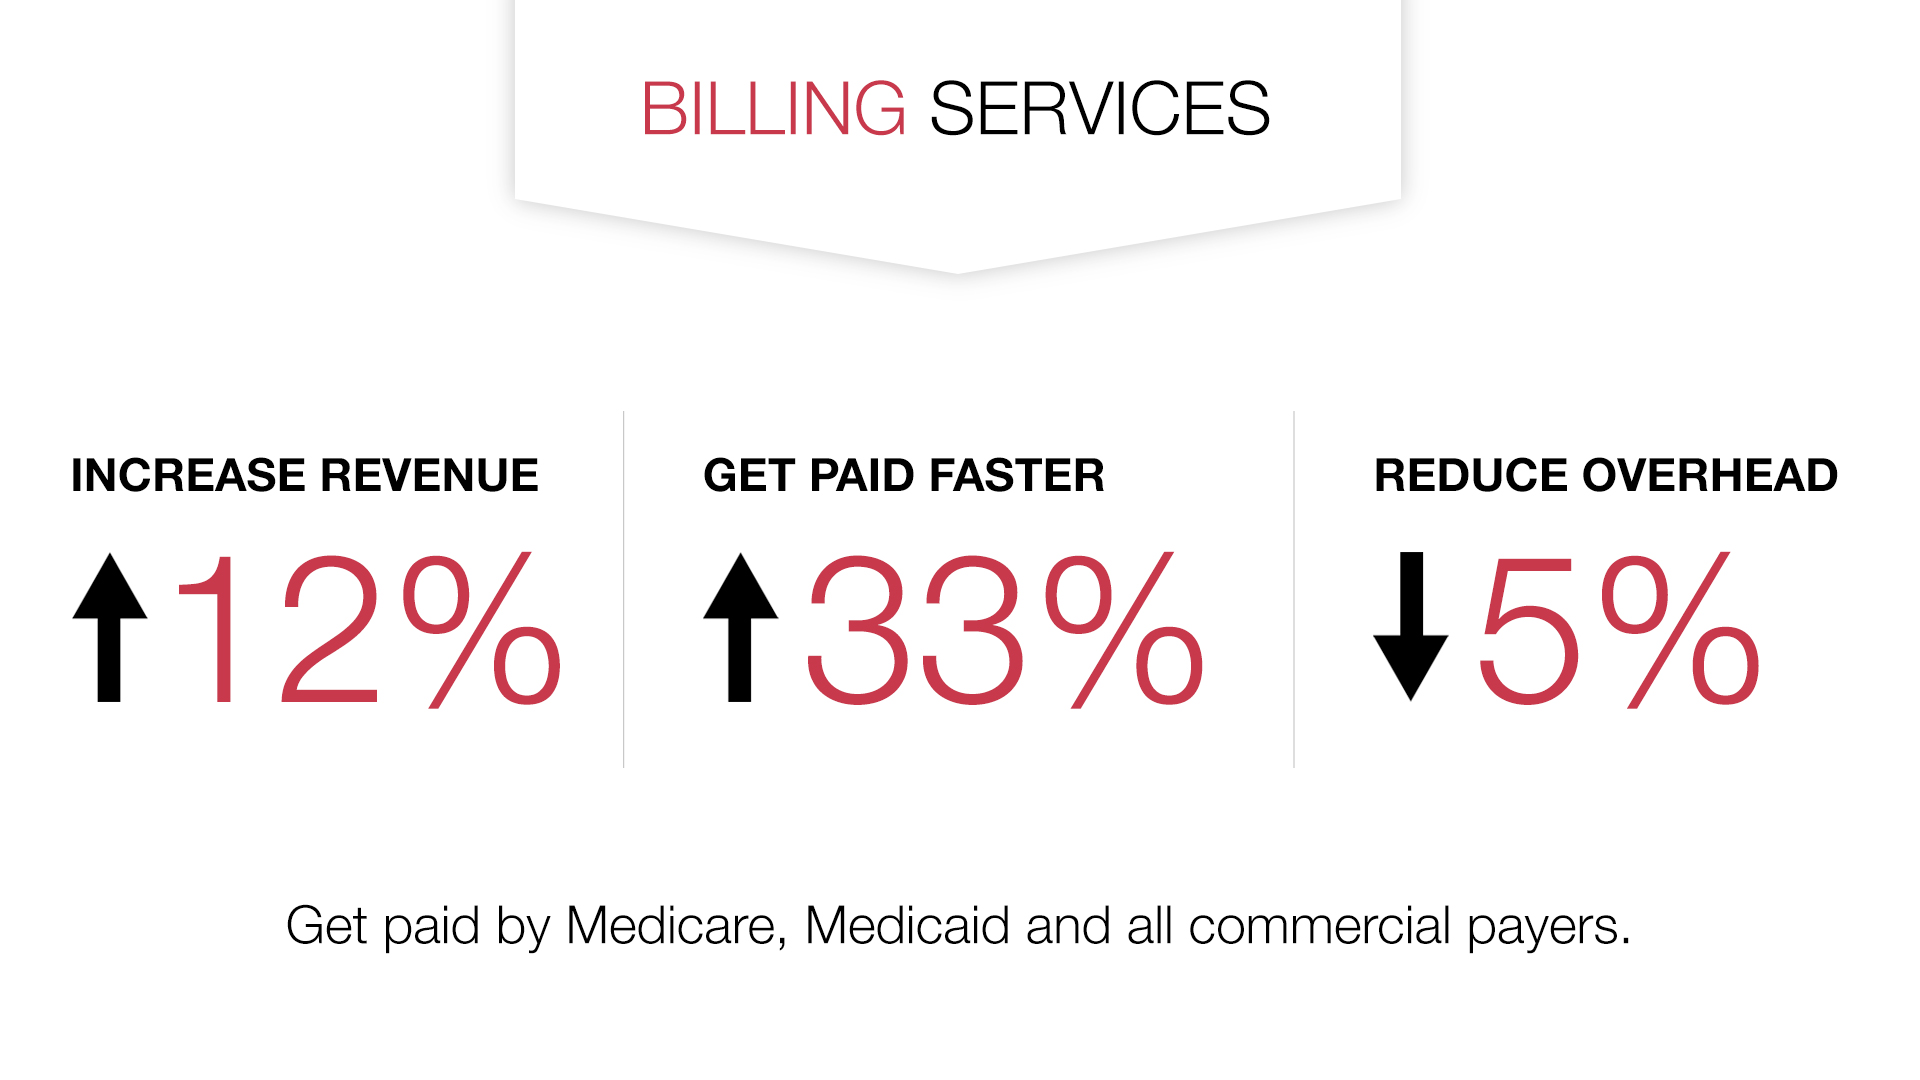 Billing services can increase revenue, help you get paid faster and reduce overhead.